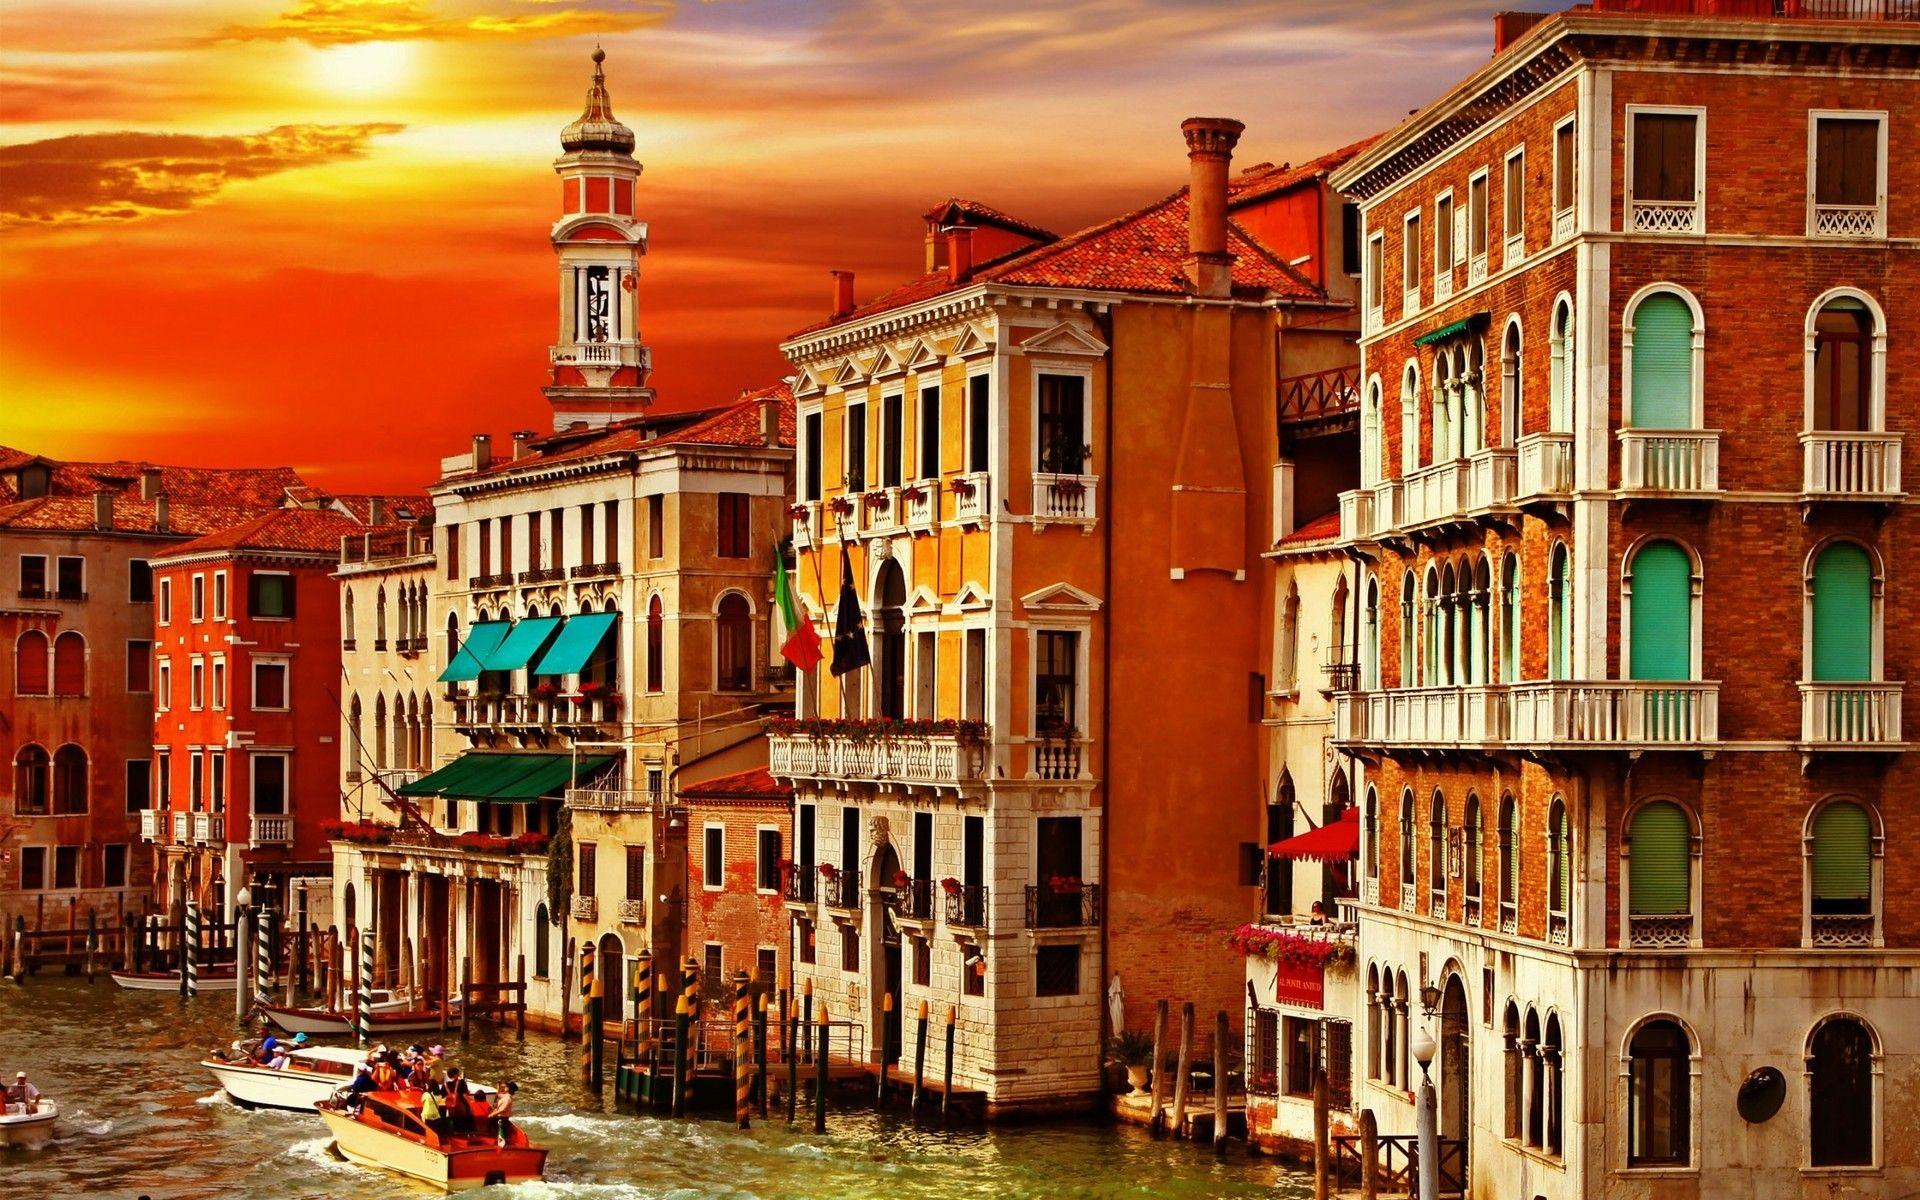 venezia canal grande italy wallpaper and background